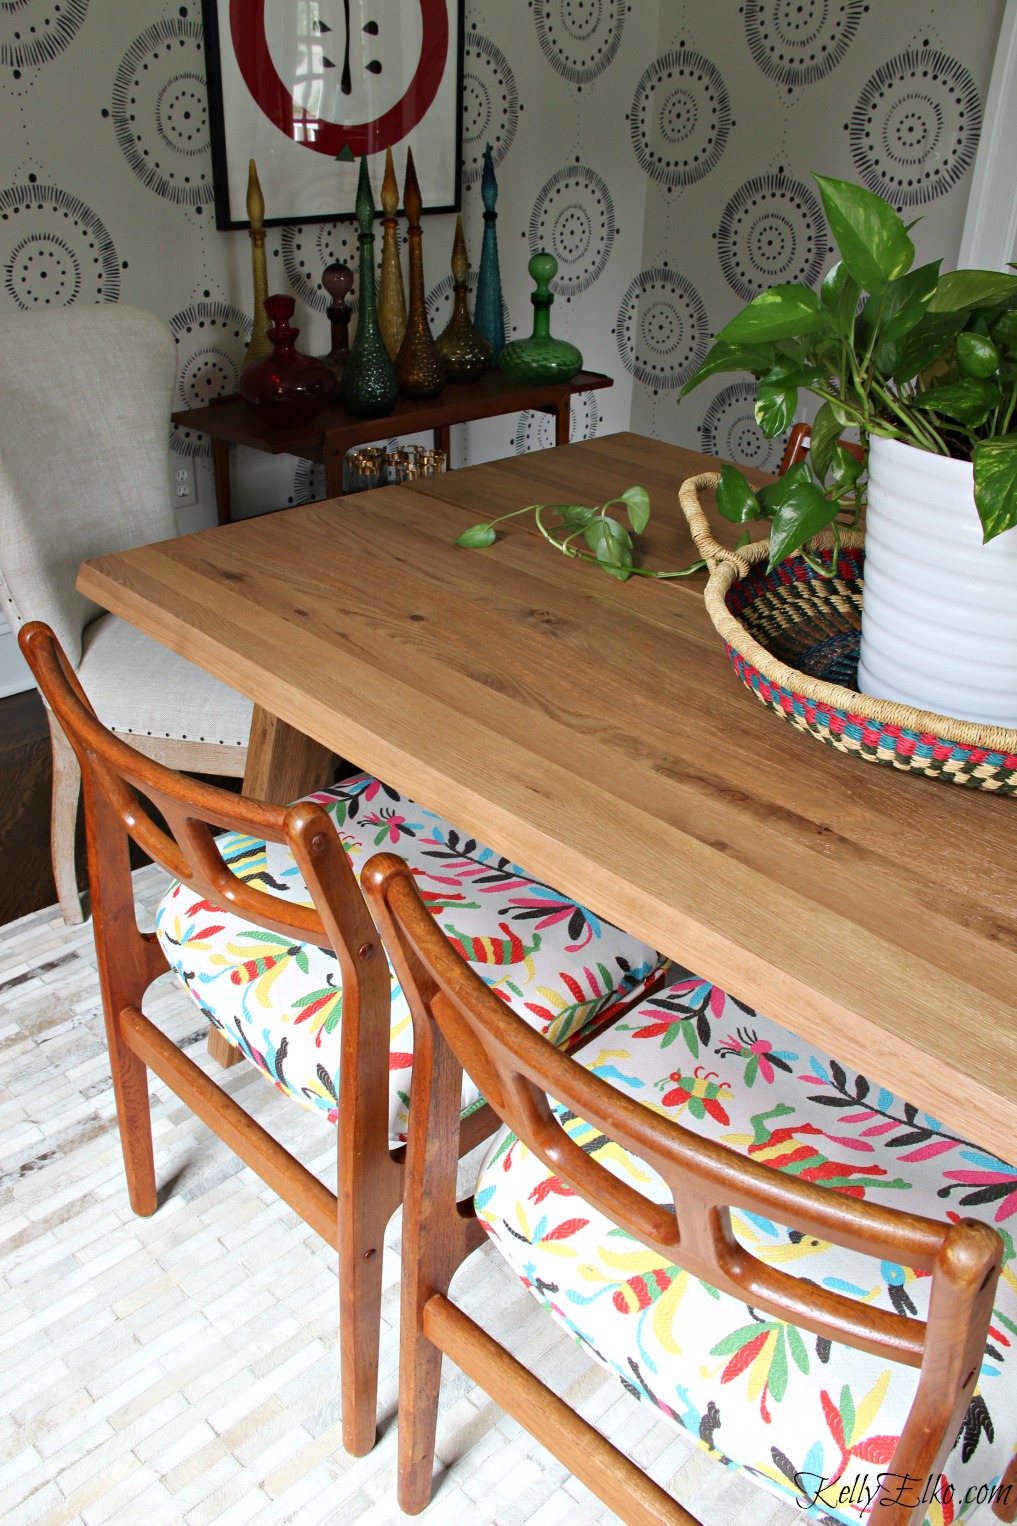 This eclectic dining room mixes Danish modern chairs with colorful otomi fabric and an Article dining table in solid oak kellyelko.com #diningroom #diningroomdecor #diningroomfurniture #midcenturymodern #midcentury #bohostyle #otomi #vintagestyle #interiordecor 